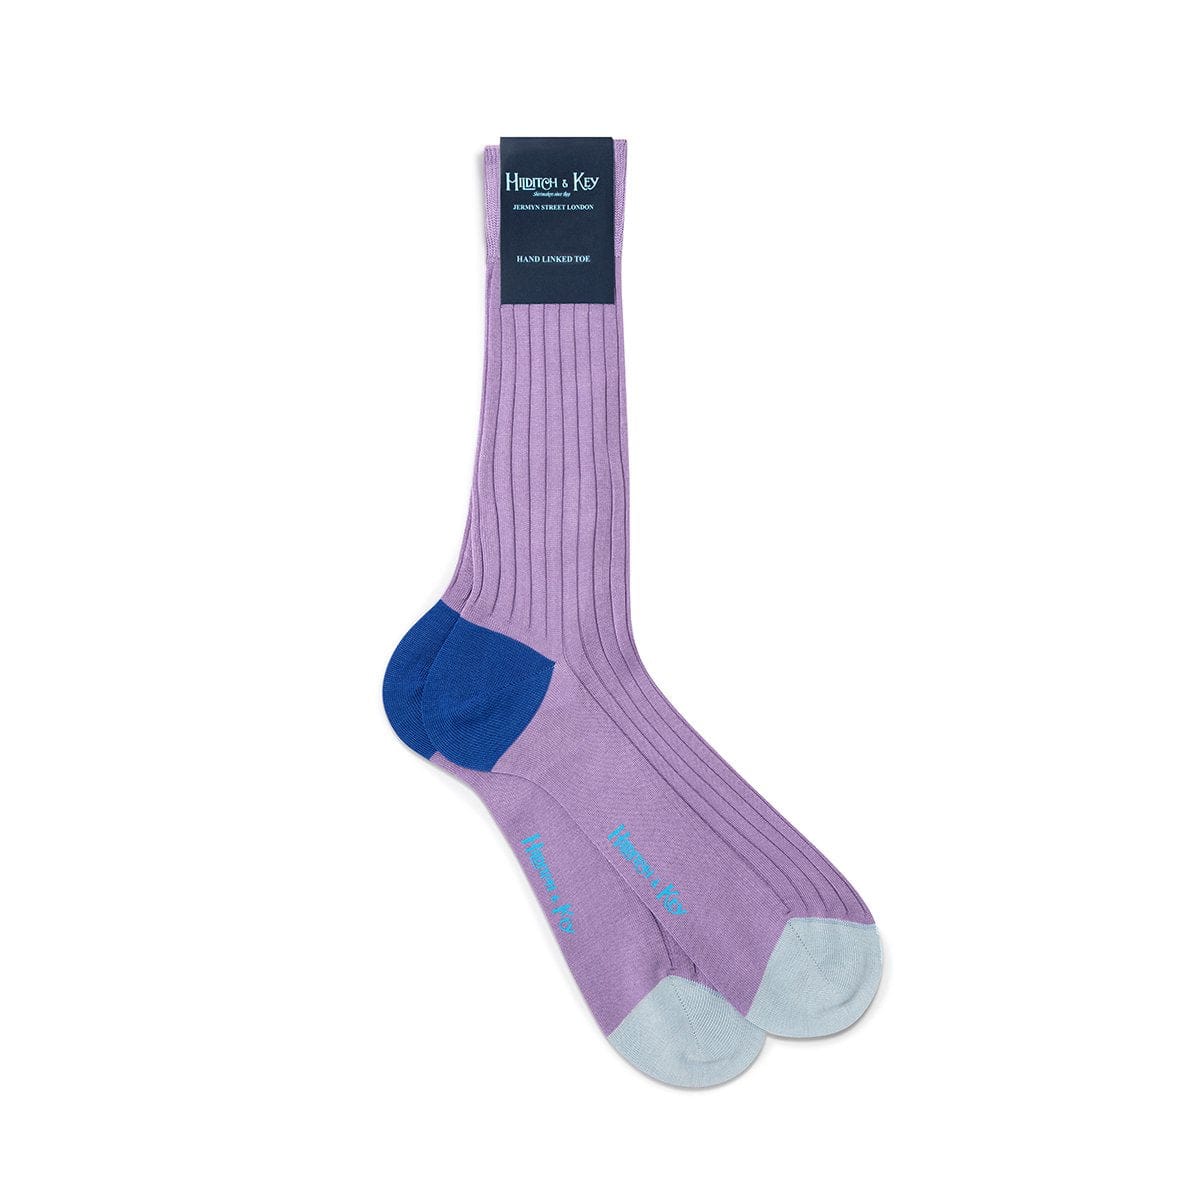 Lilac Cotton Socks with Contrast Heel & Toe